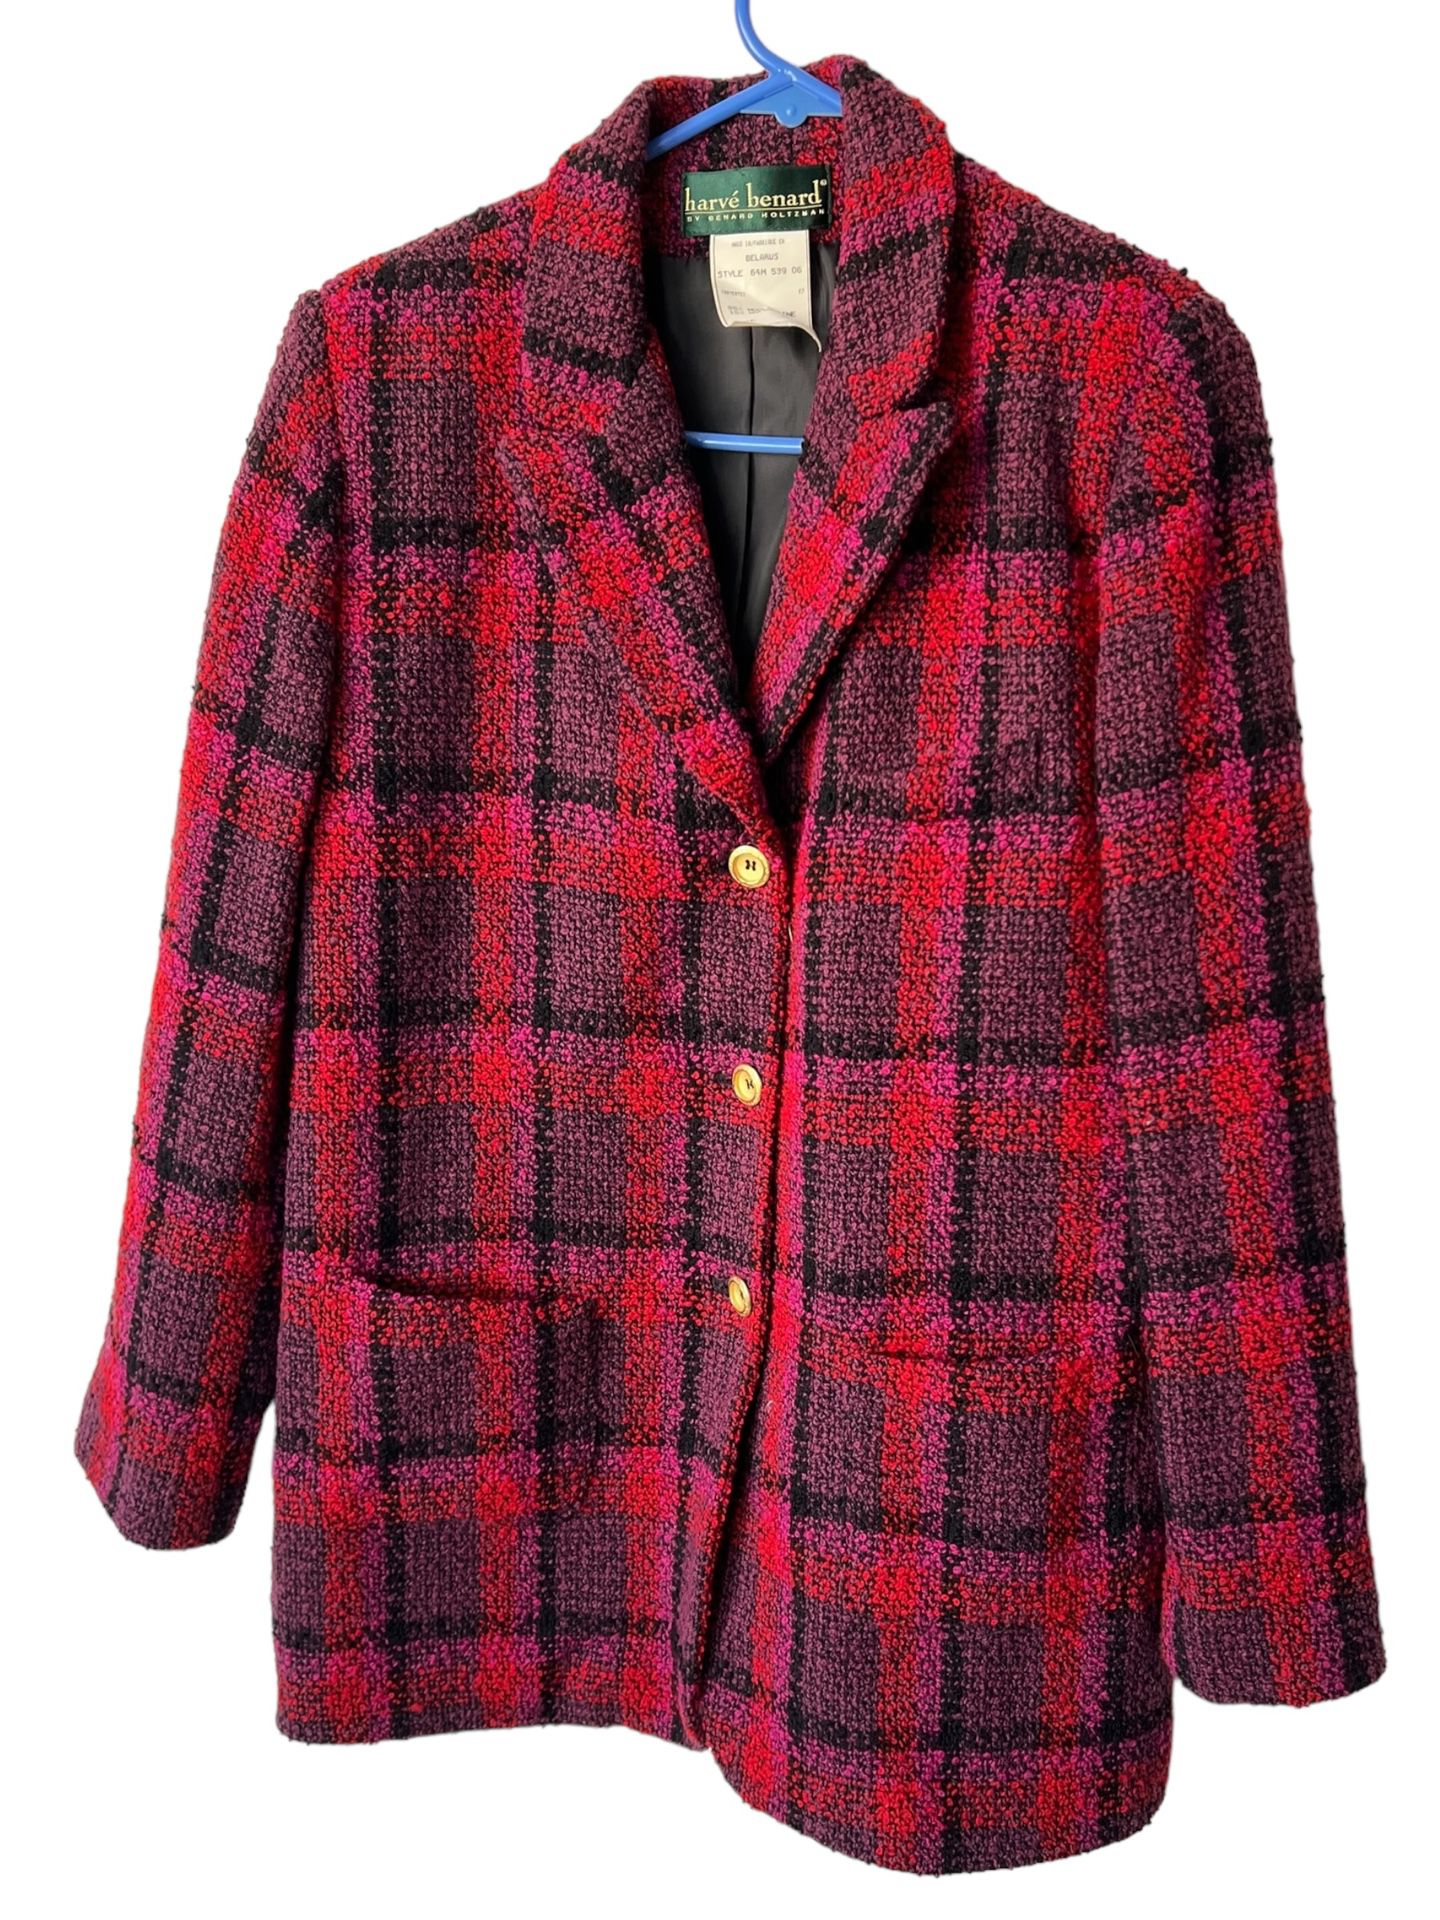 Harve Bernard Pink Plaid Wool Jacket Size 6 Button Down Measures In Pictures.  Comes from a pet and smoke free home.  This beautiful pink plaid wool j